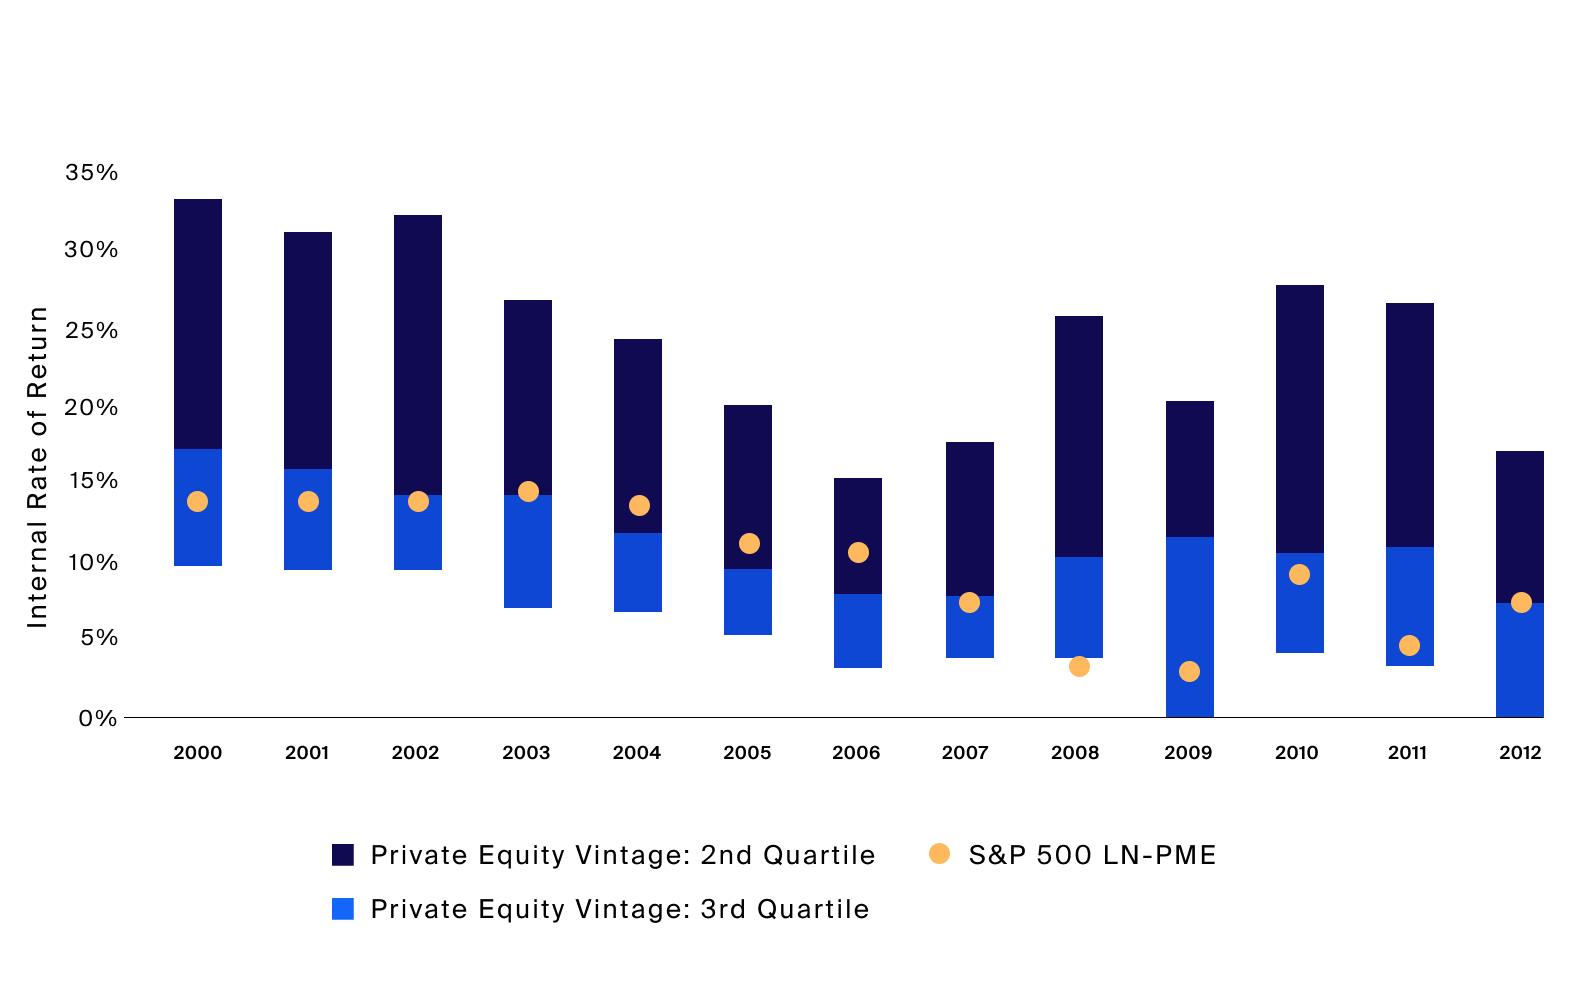 First and second quartile private equity funds typically outperform a public market equivalent across vintages and differing valuation environments